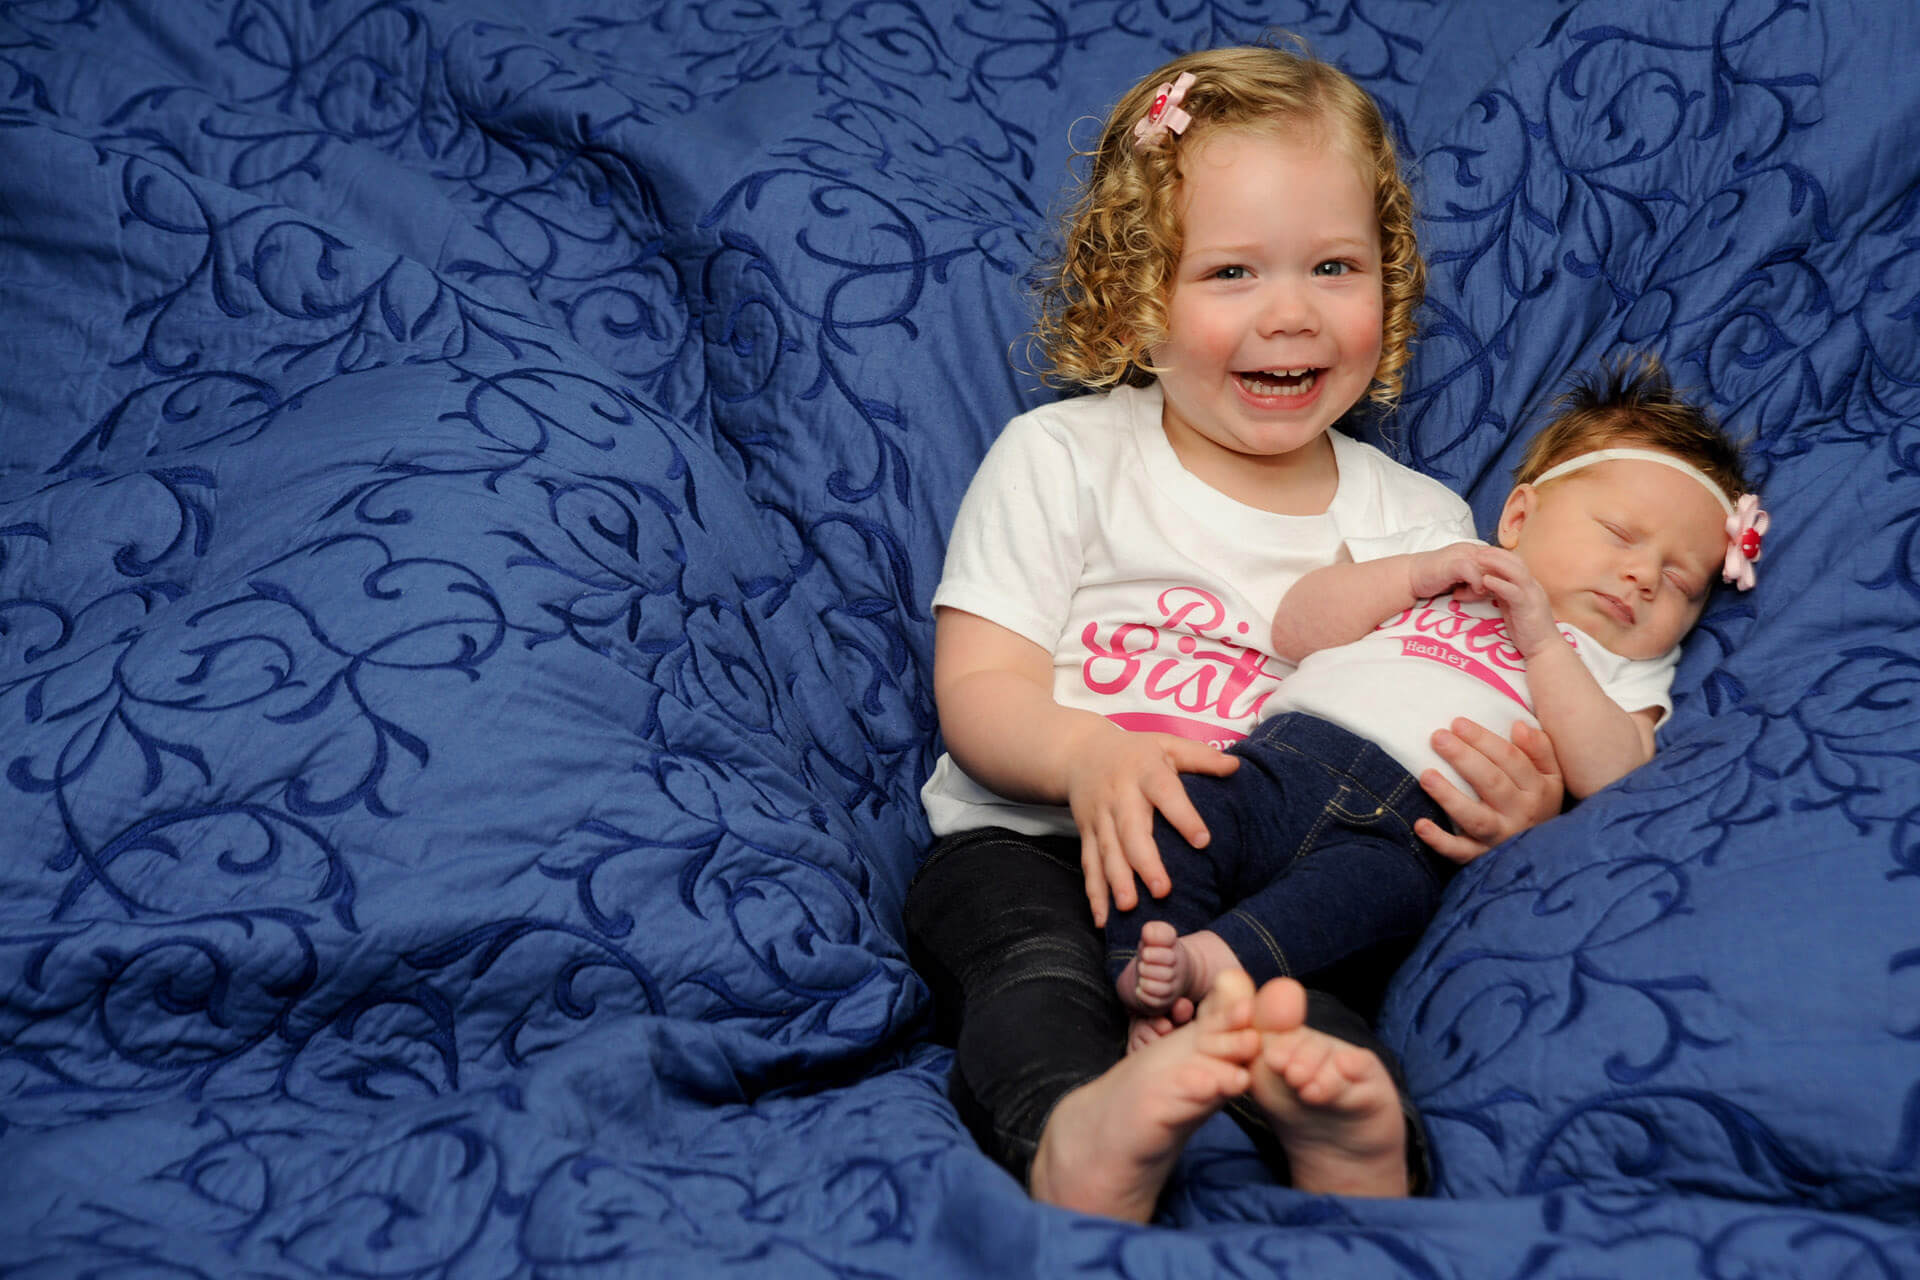 Best Detroit baby photographer works with families to capture first photos with siblings in their metro Detroit, Michigan area homes for baby picture photo shoots.